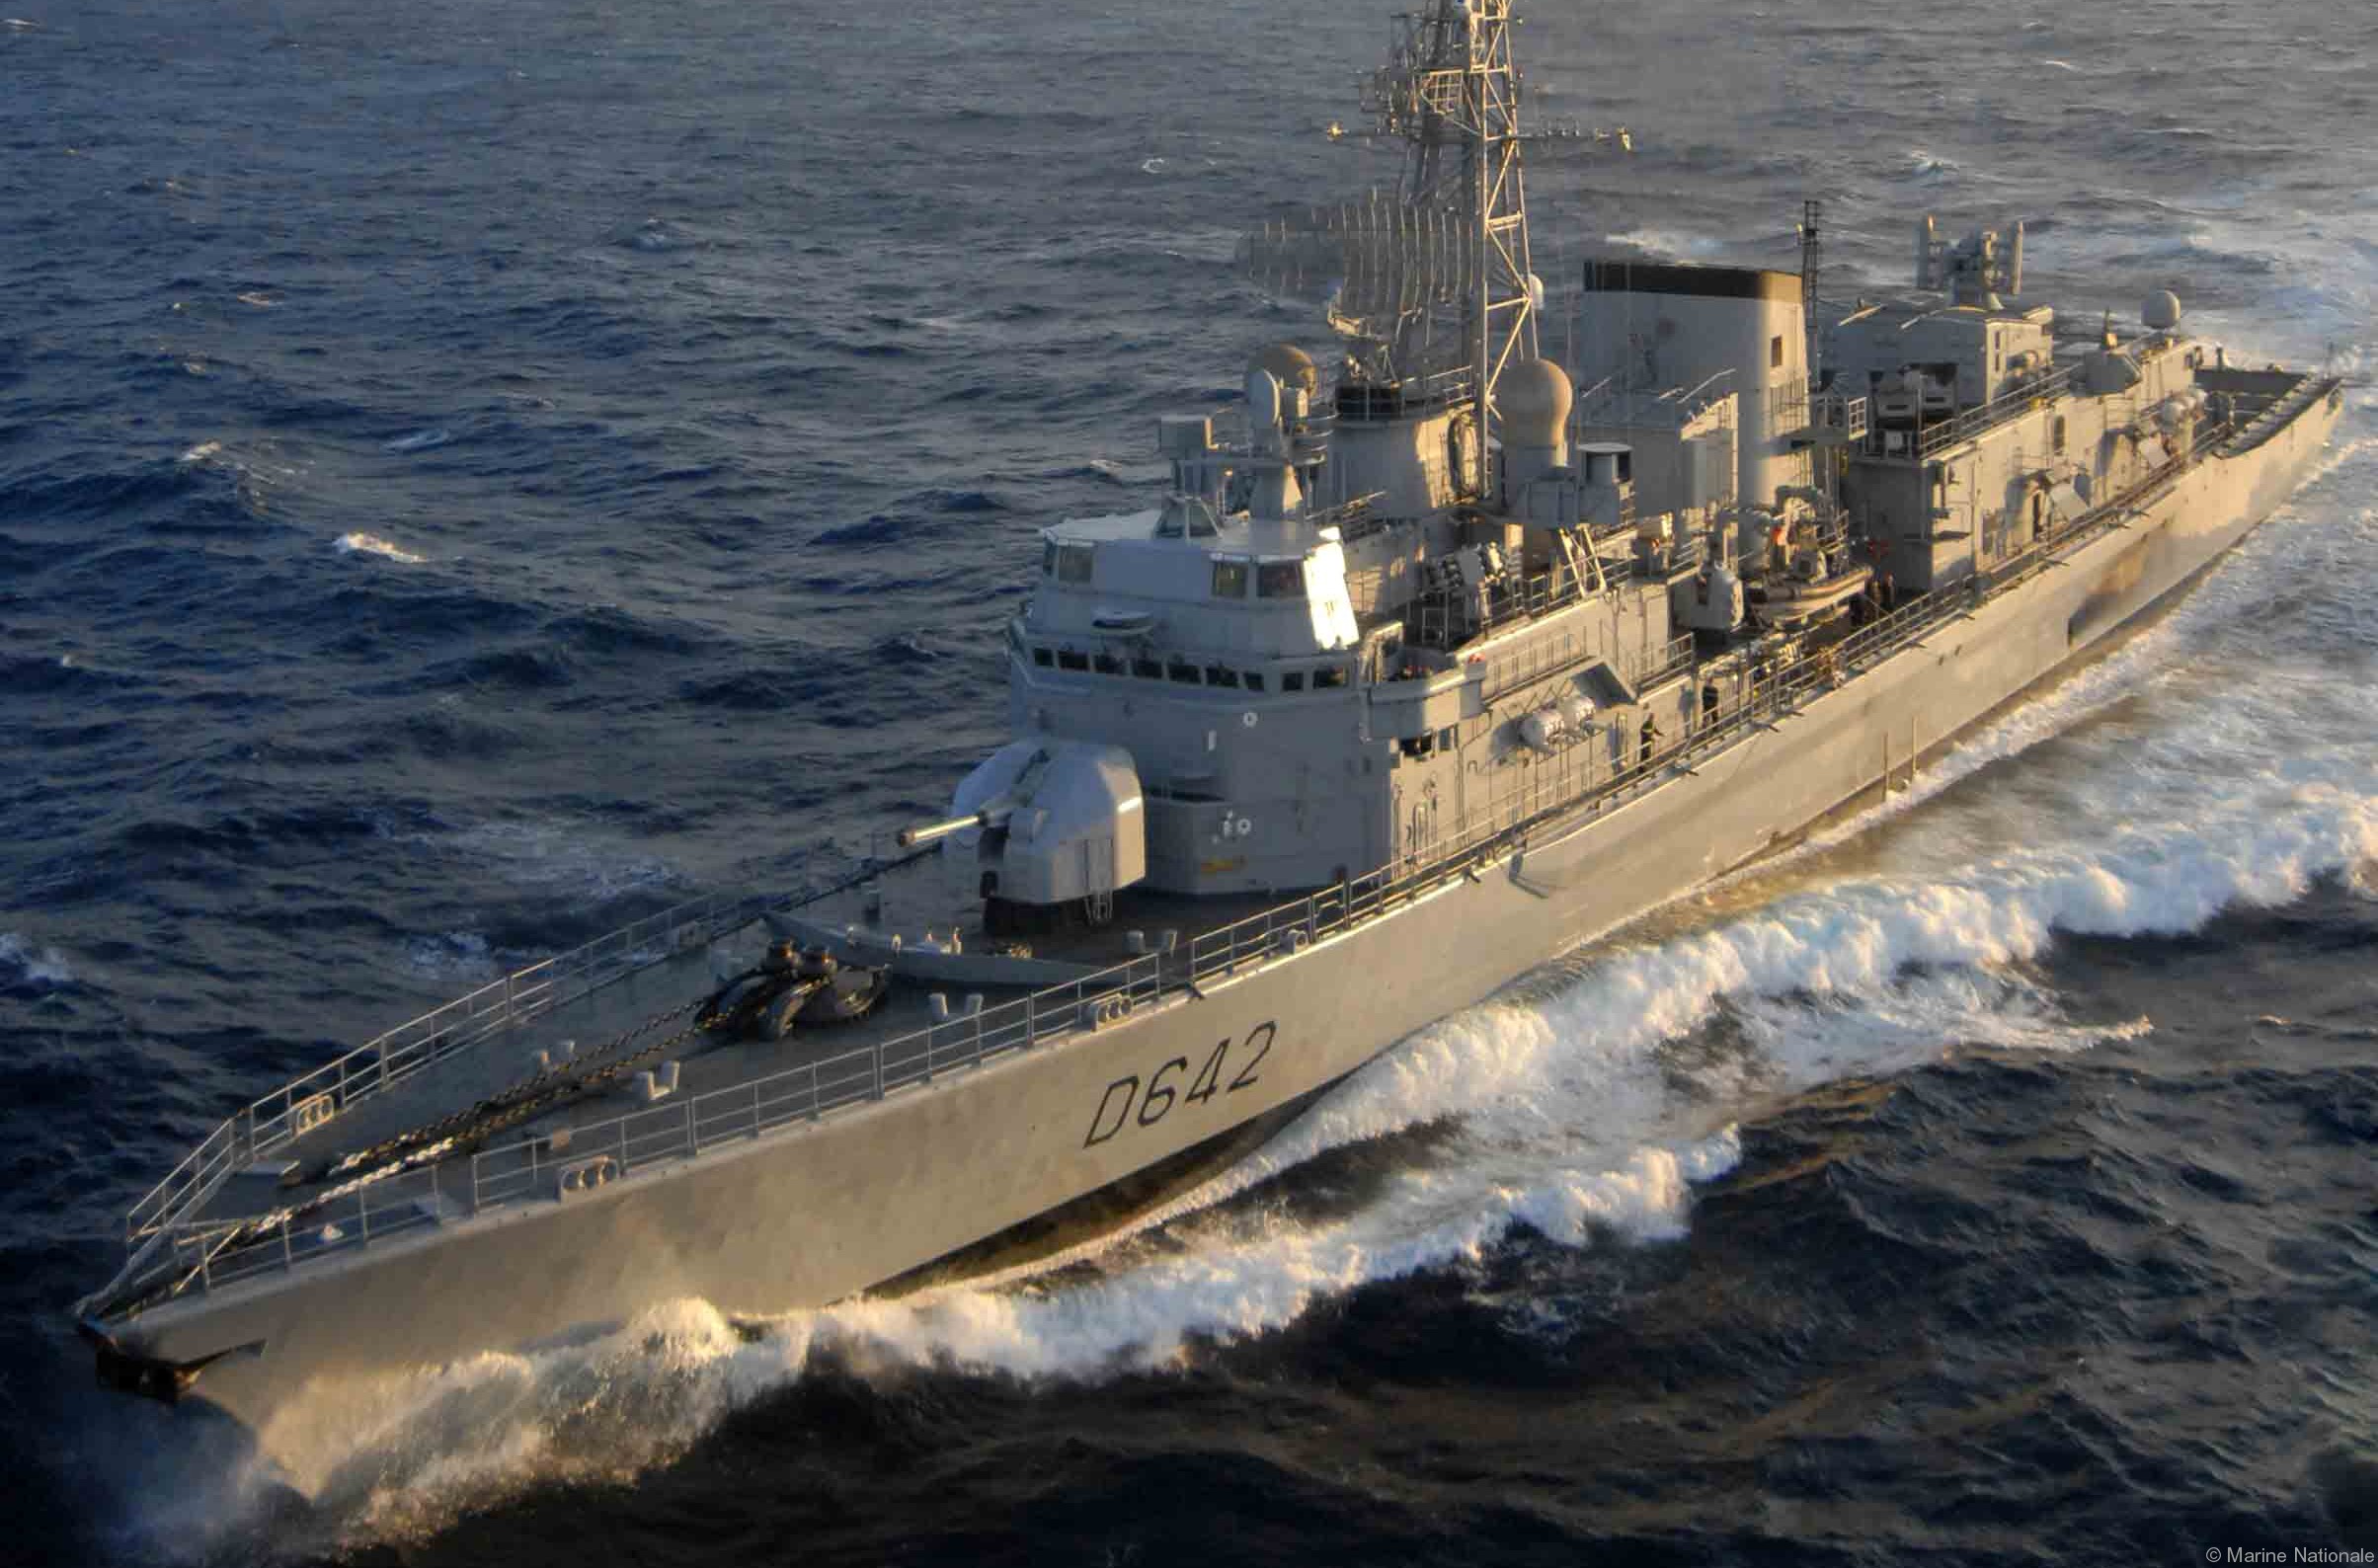 d-642 fs montcalm georges leygues f70as class anti submarine frigate destroyer asw french navy marine nationale 08